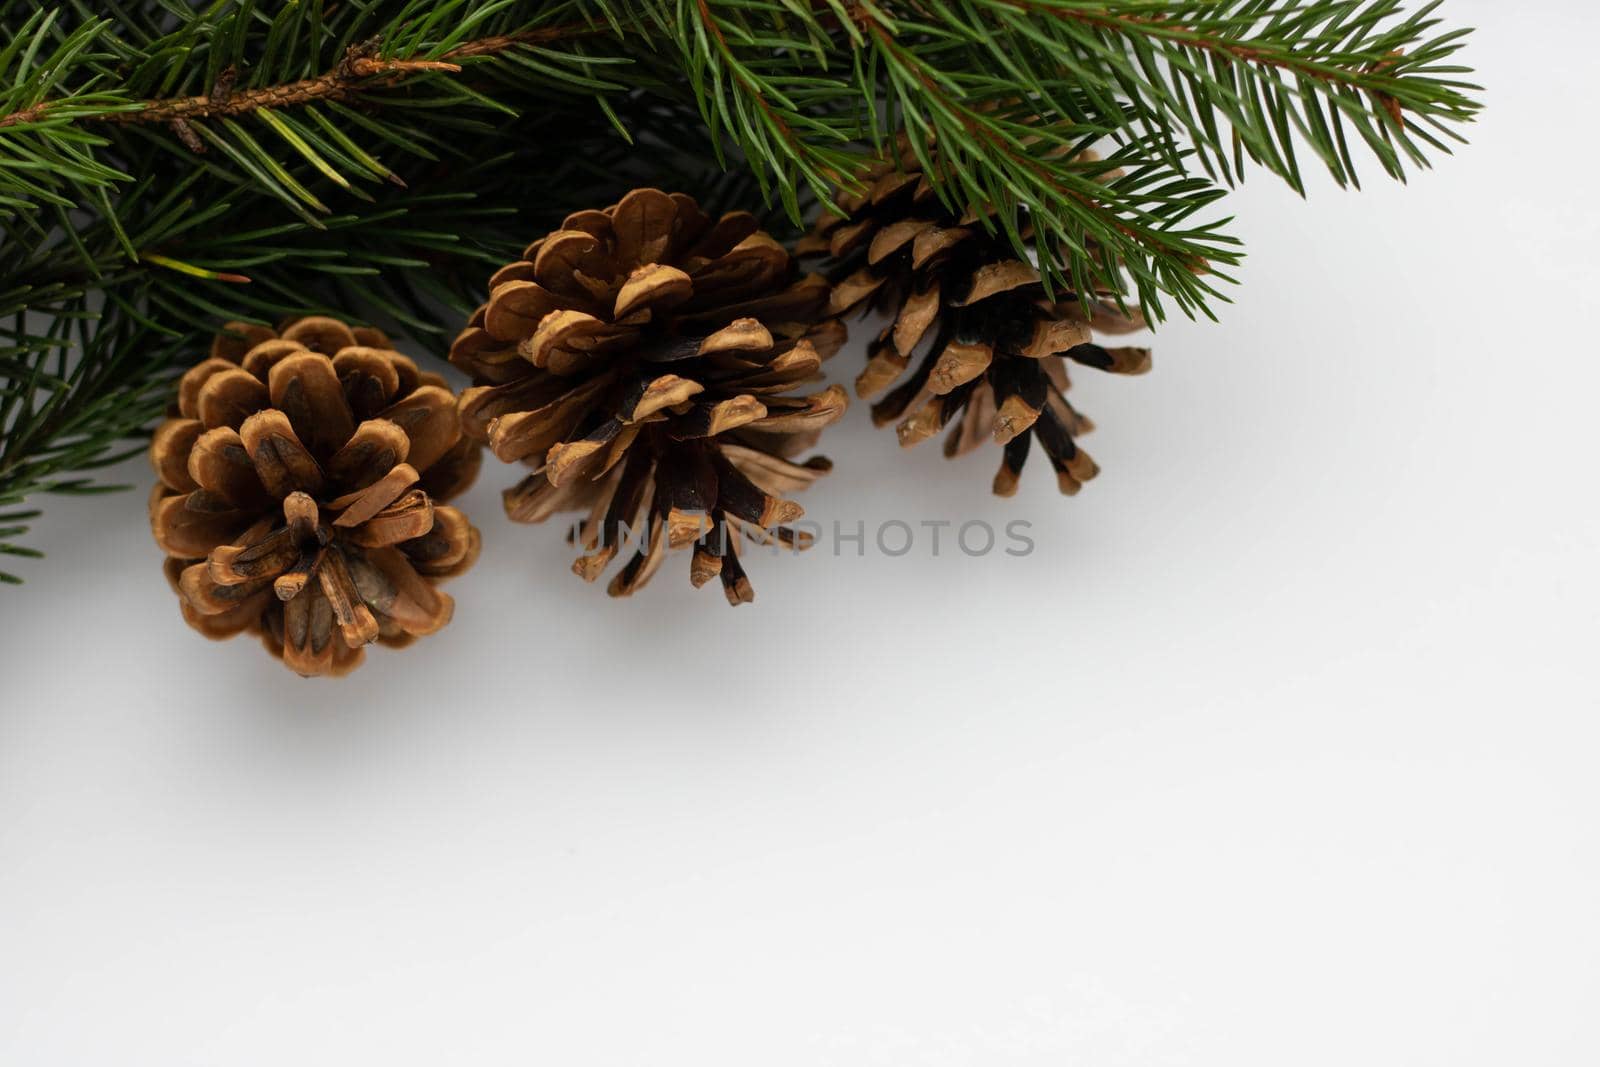 Fir branches with cones in the corner on a white background isolated. New Year card template.